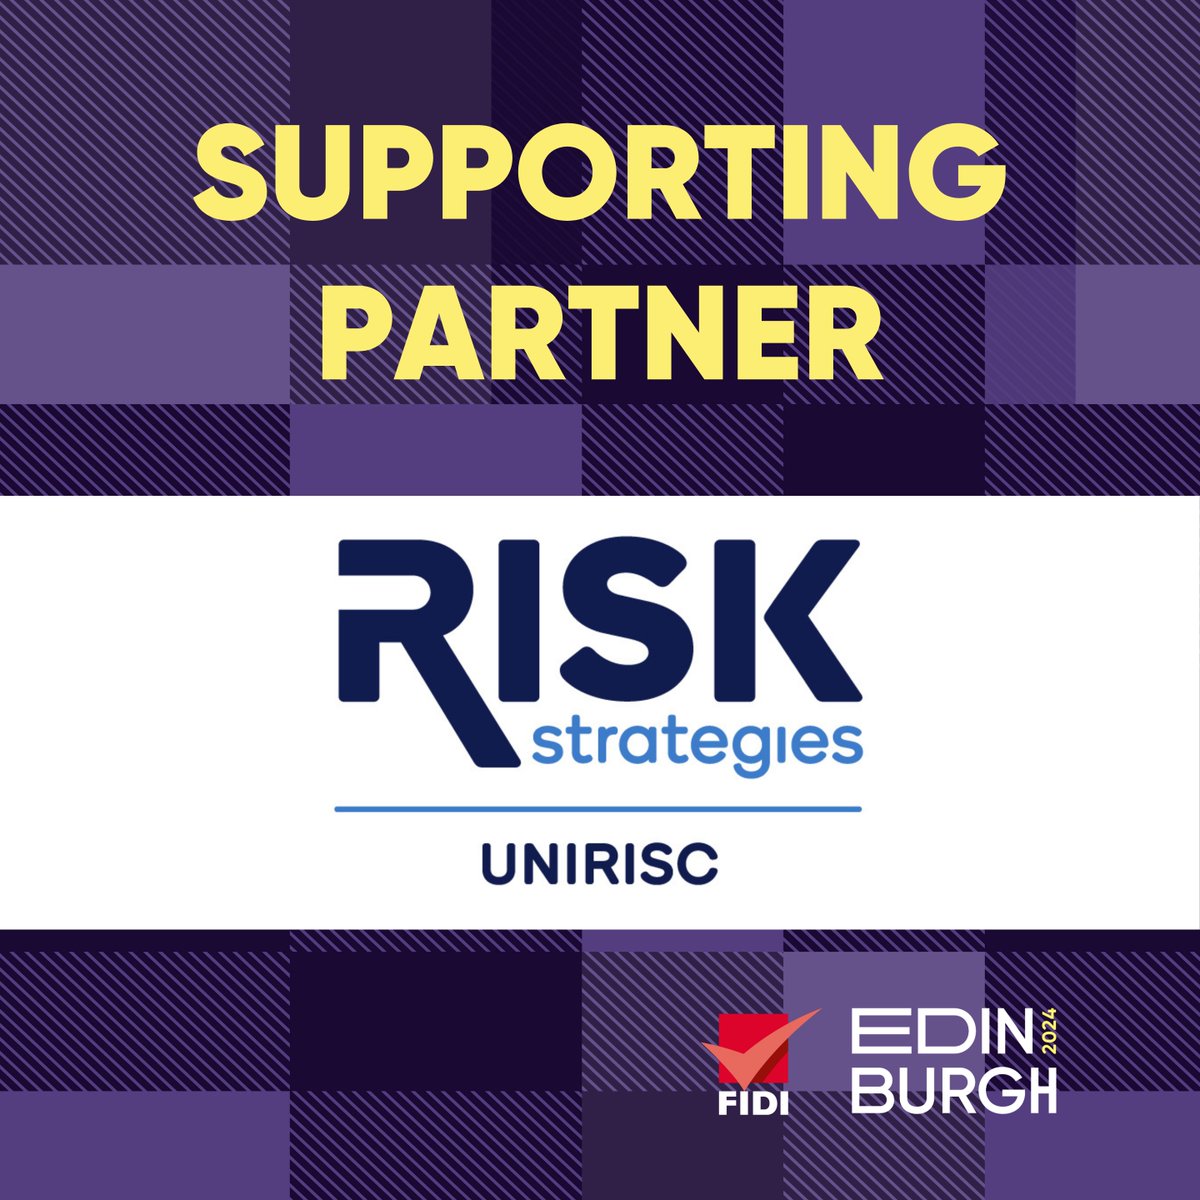 🌍 #2024FIDIconference: Thank you, @RiskStrategies, for being a partner of the 2024 FIDI Conference in Edinburgh! Get the app to connect with attendees, book meetings & view your agenda : 🔶Google Play Store ➡ lnkd.in/e86wv6Jv 🔶Apple App Store ➡ lnkd.in/e7XJ6xun